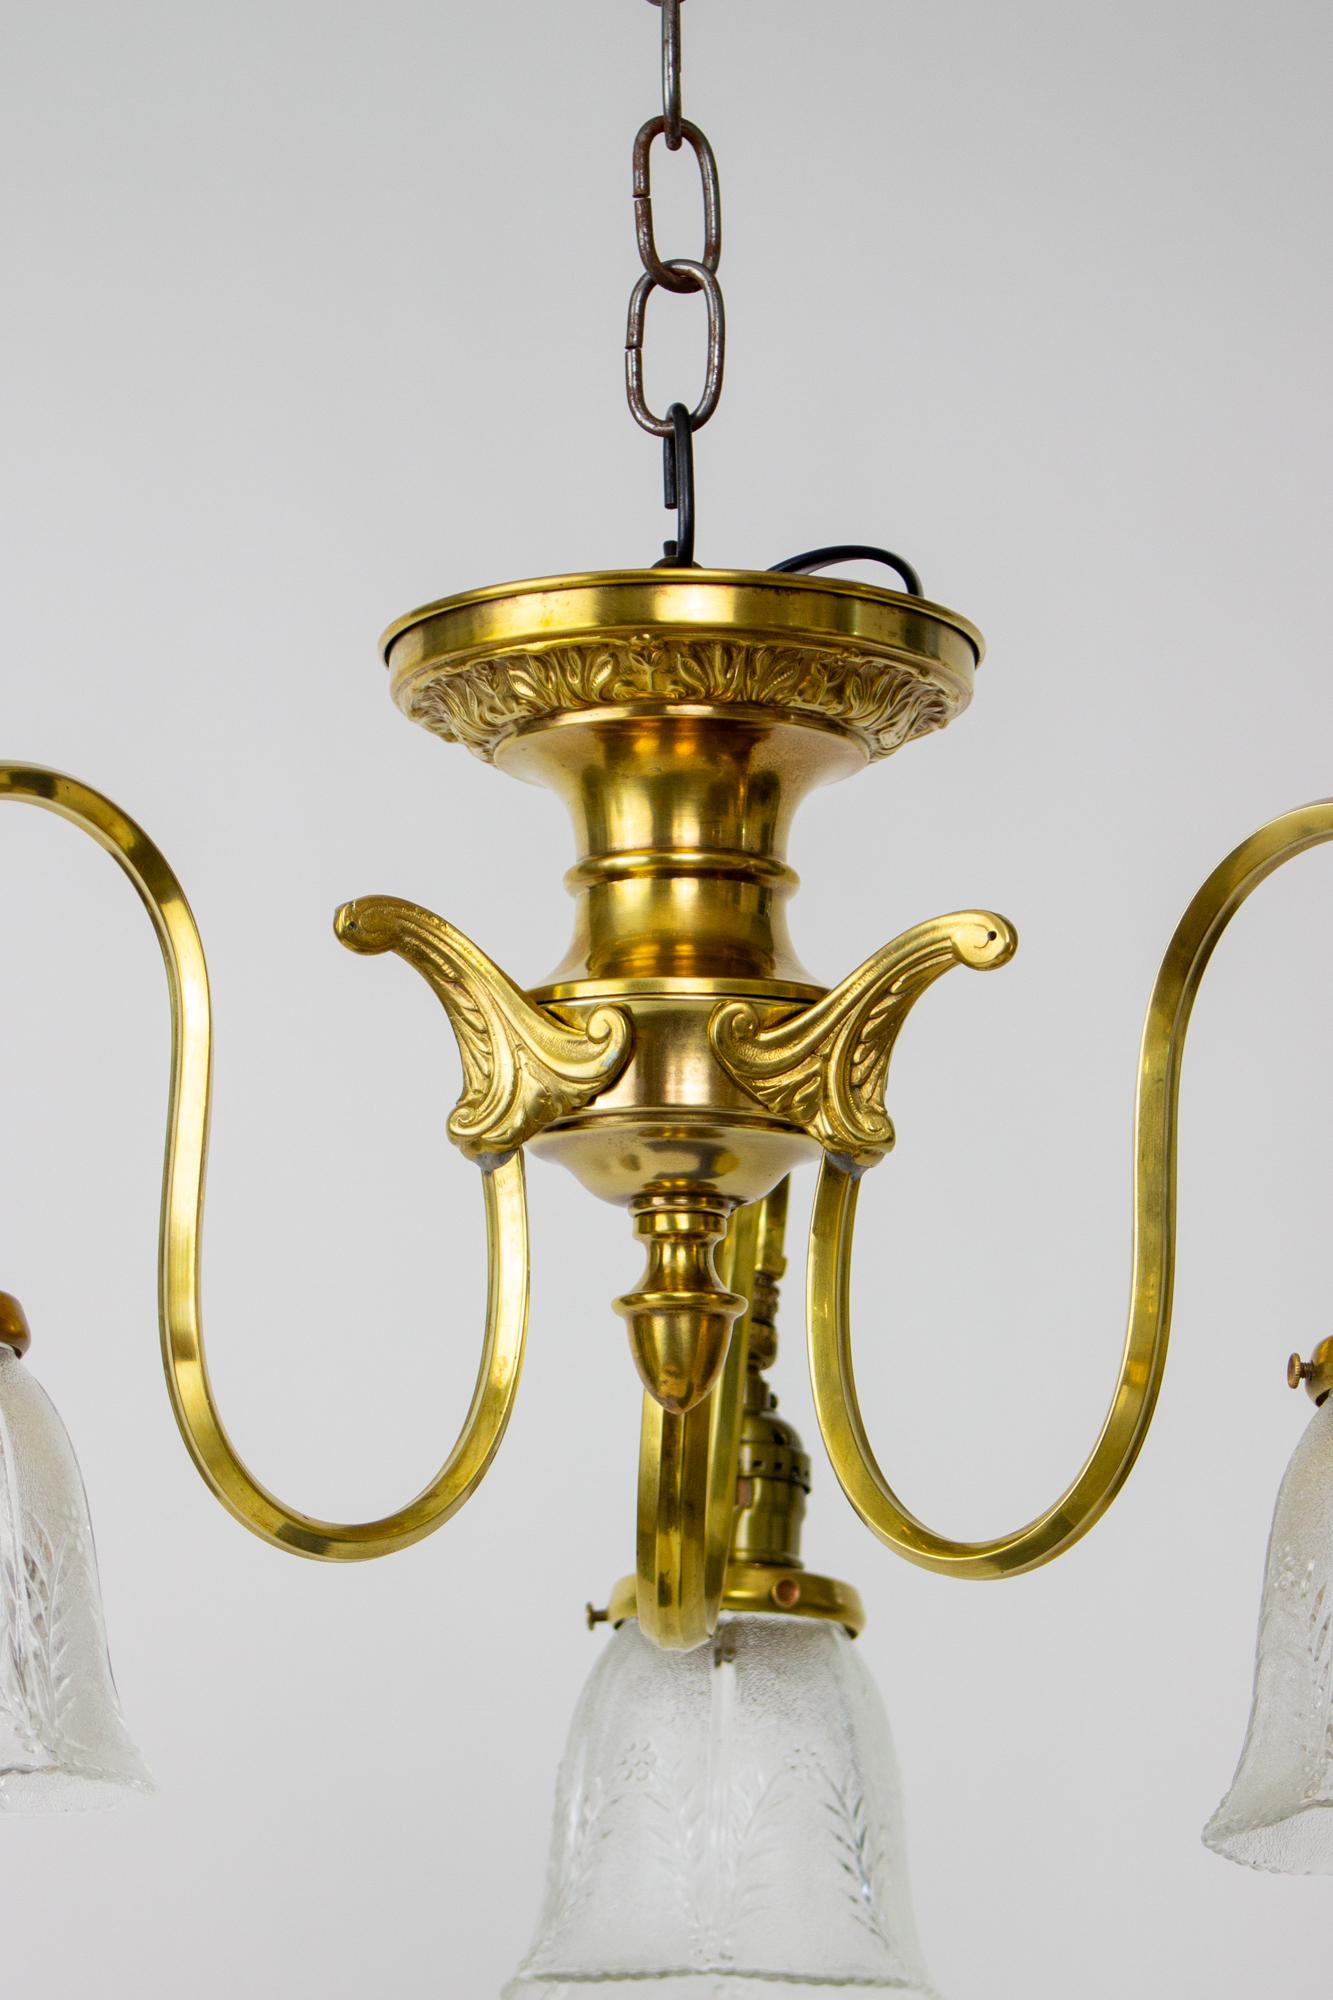 Early 20th century three light prismatic semi flush fixture. Brass ceiling plate with three curved arms. Original prismatic glass shades. Early 20th Century. American. In good condition, with some old repairs to the brass. rewired and ready for